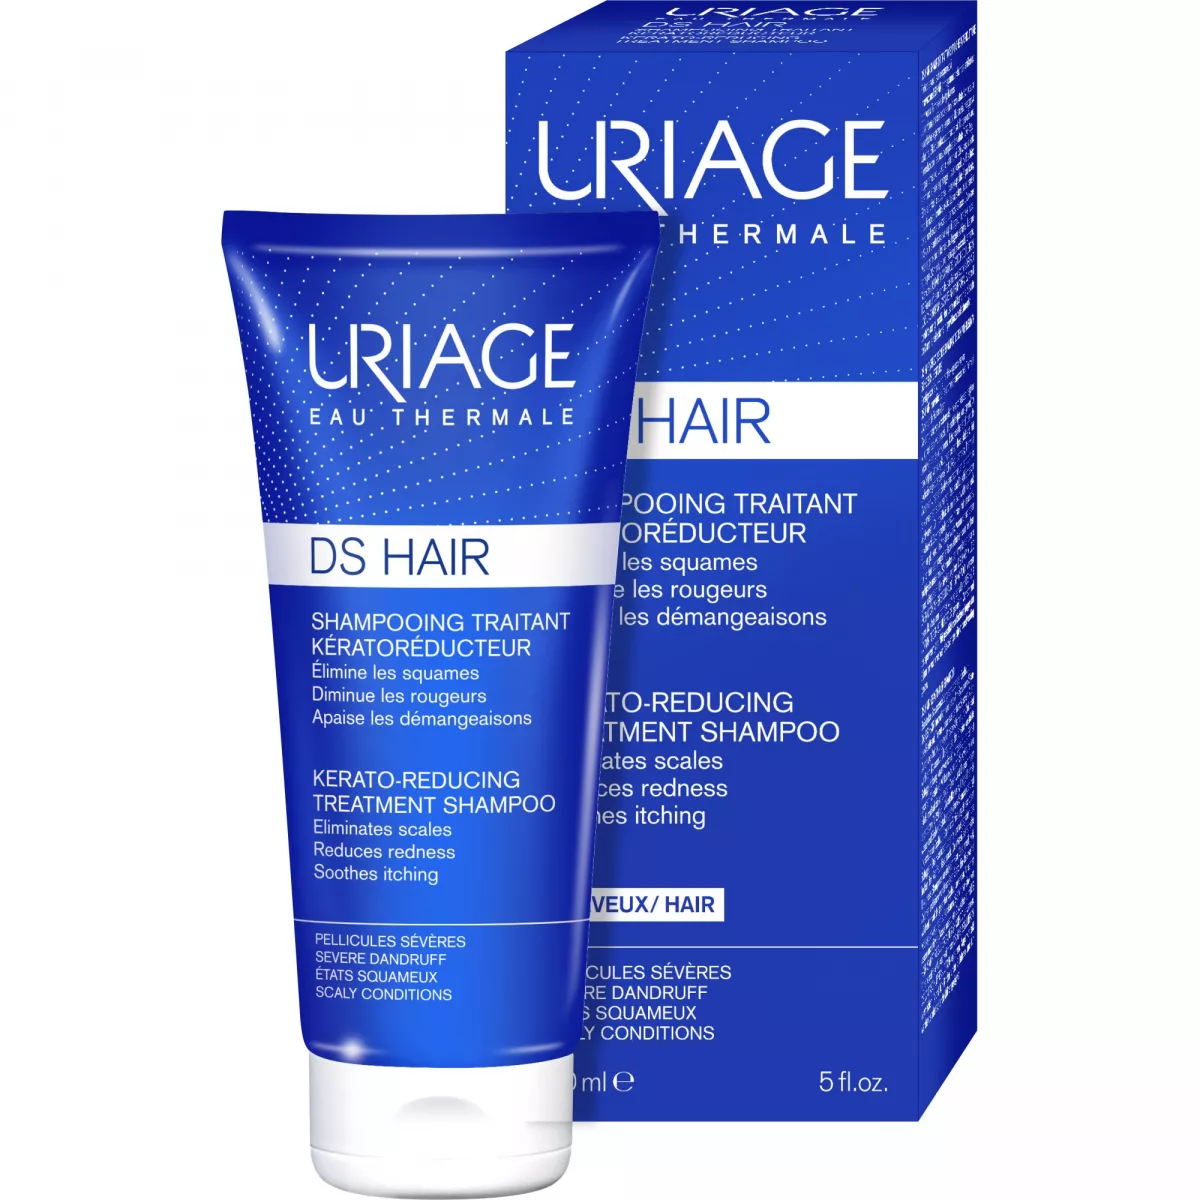 Uriage D.S. Hair Sampon Tratament Kerato-Reductor 150 ml, 65186469